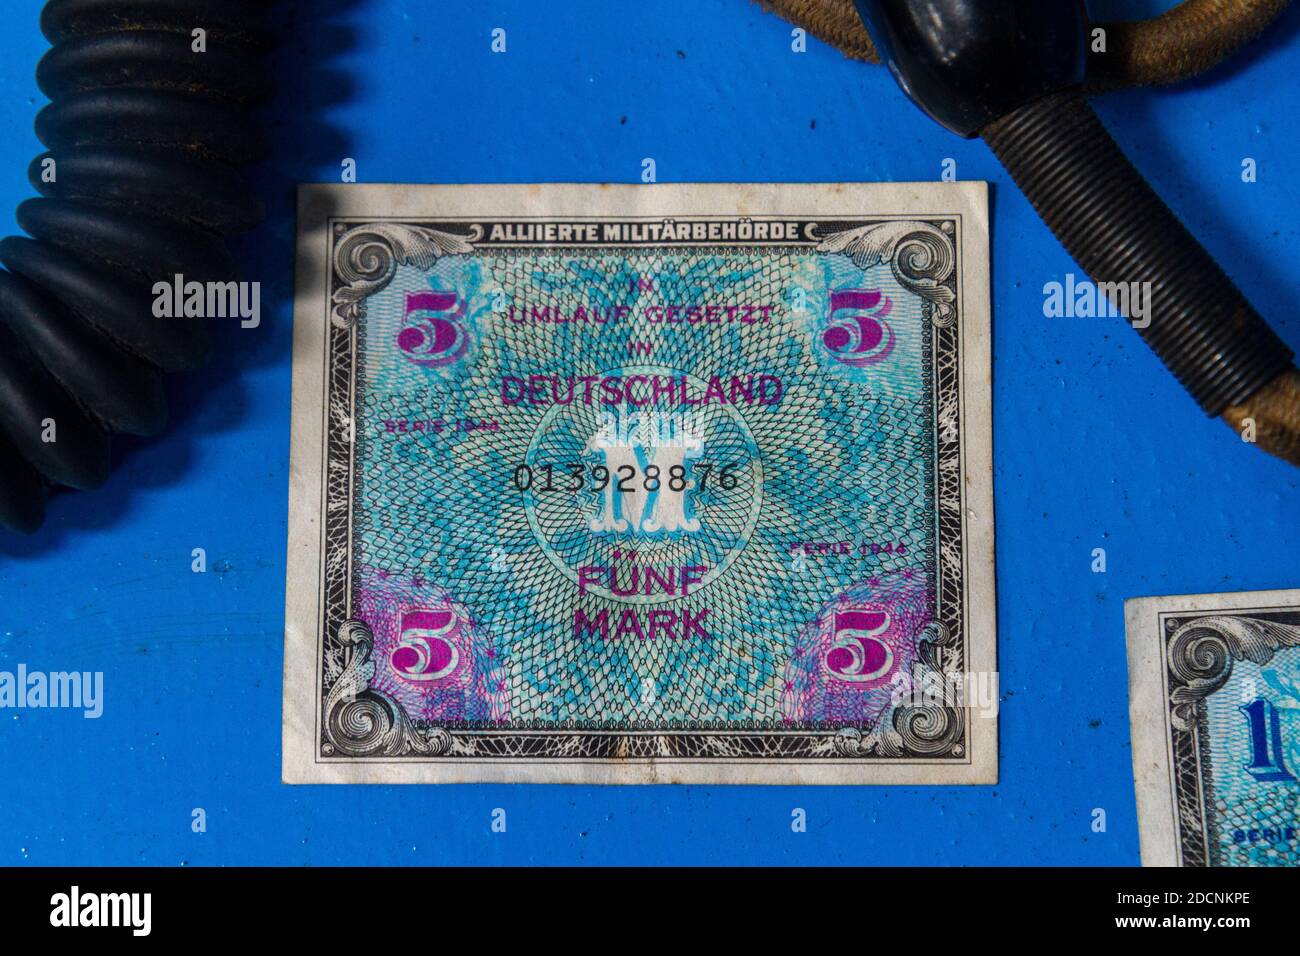 WWII, Series 1944, German Currency Bank Note Funf mark, 5 Mark Note,  Lincolnshire Aviation Heritage Museum, East Kirkby, Spilsby, Lincs, UK. Stock Photo